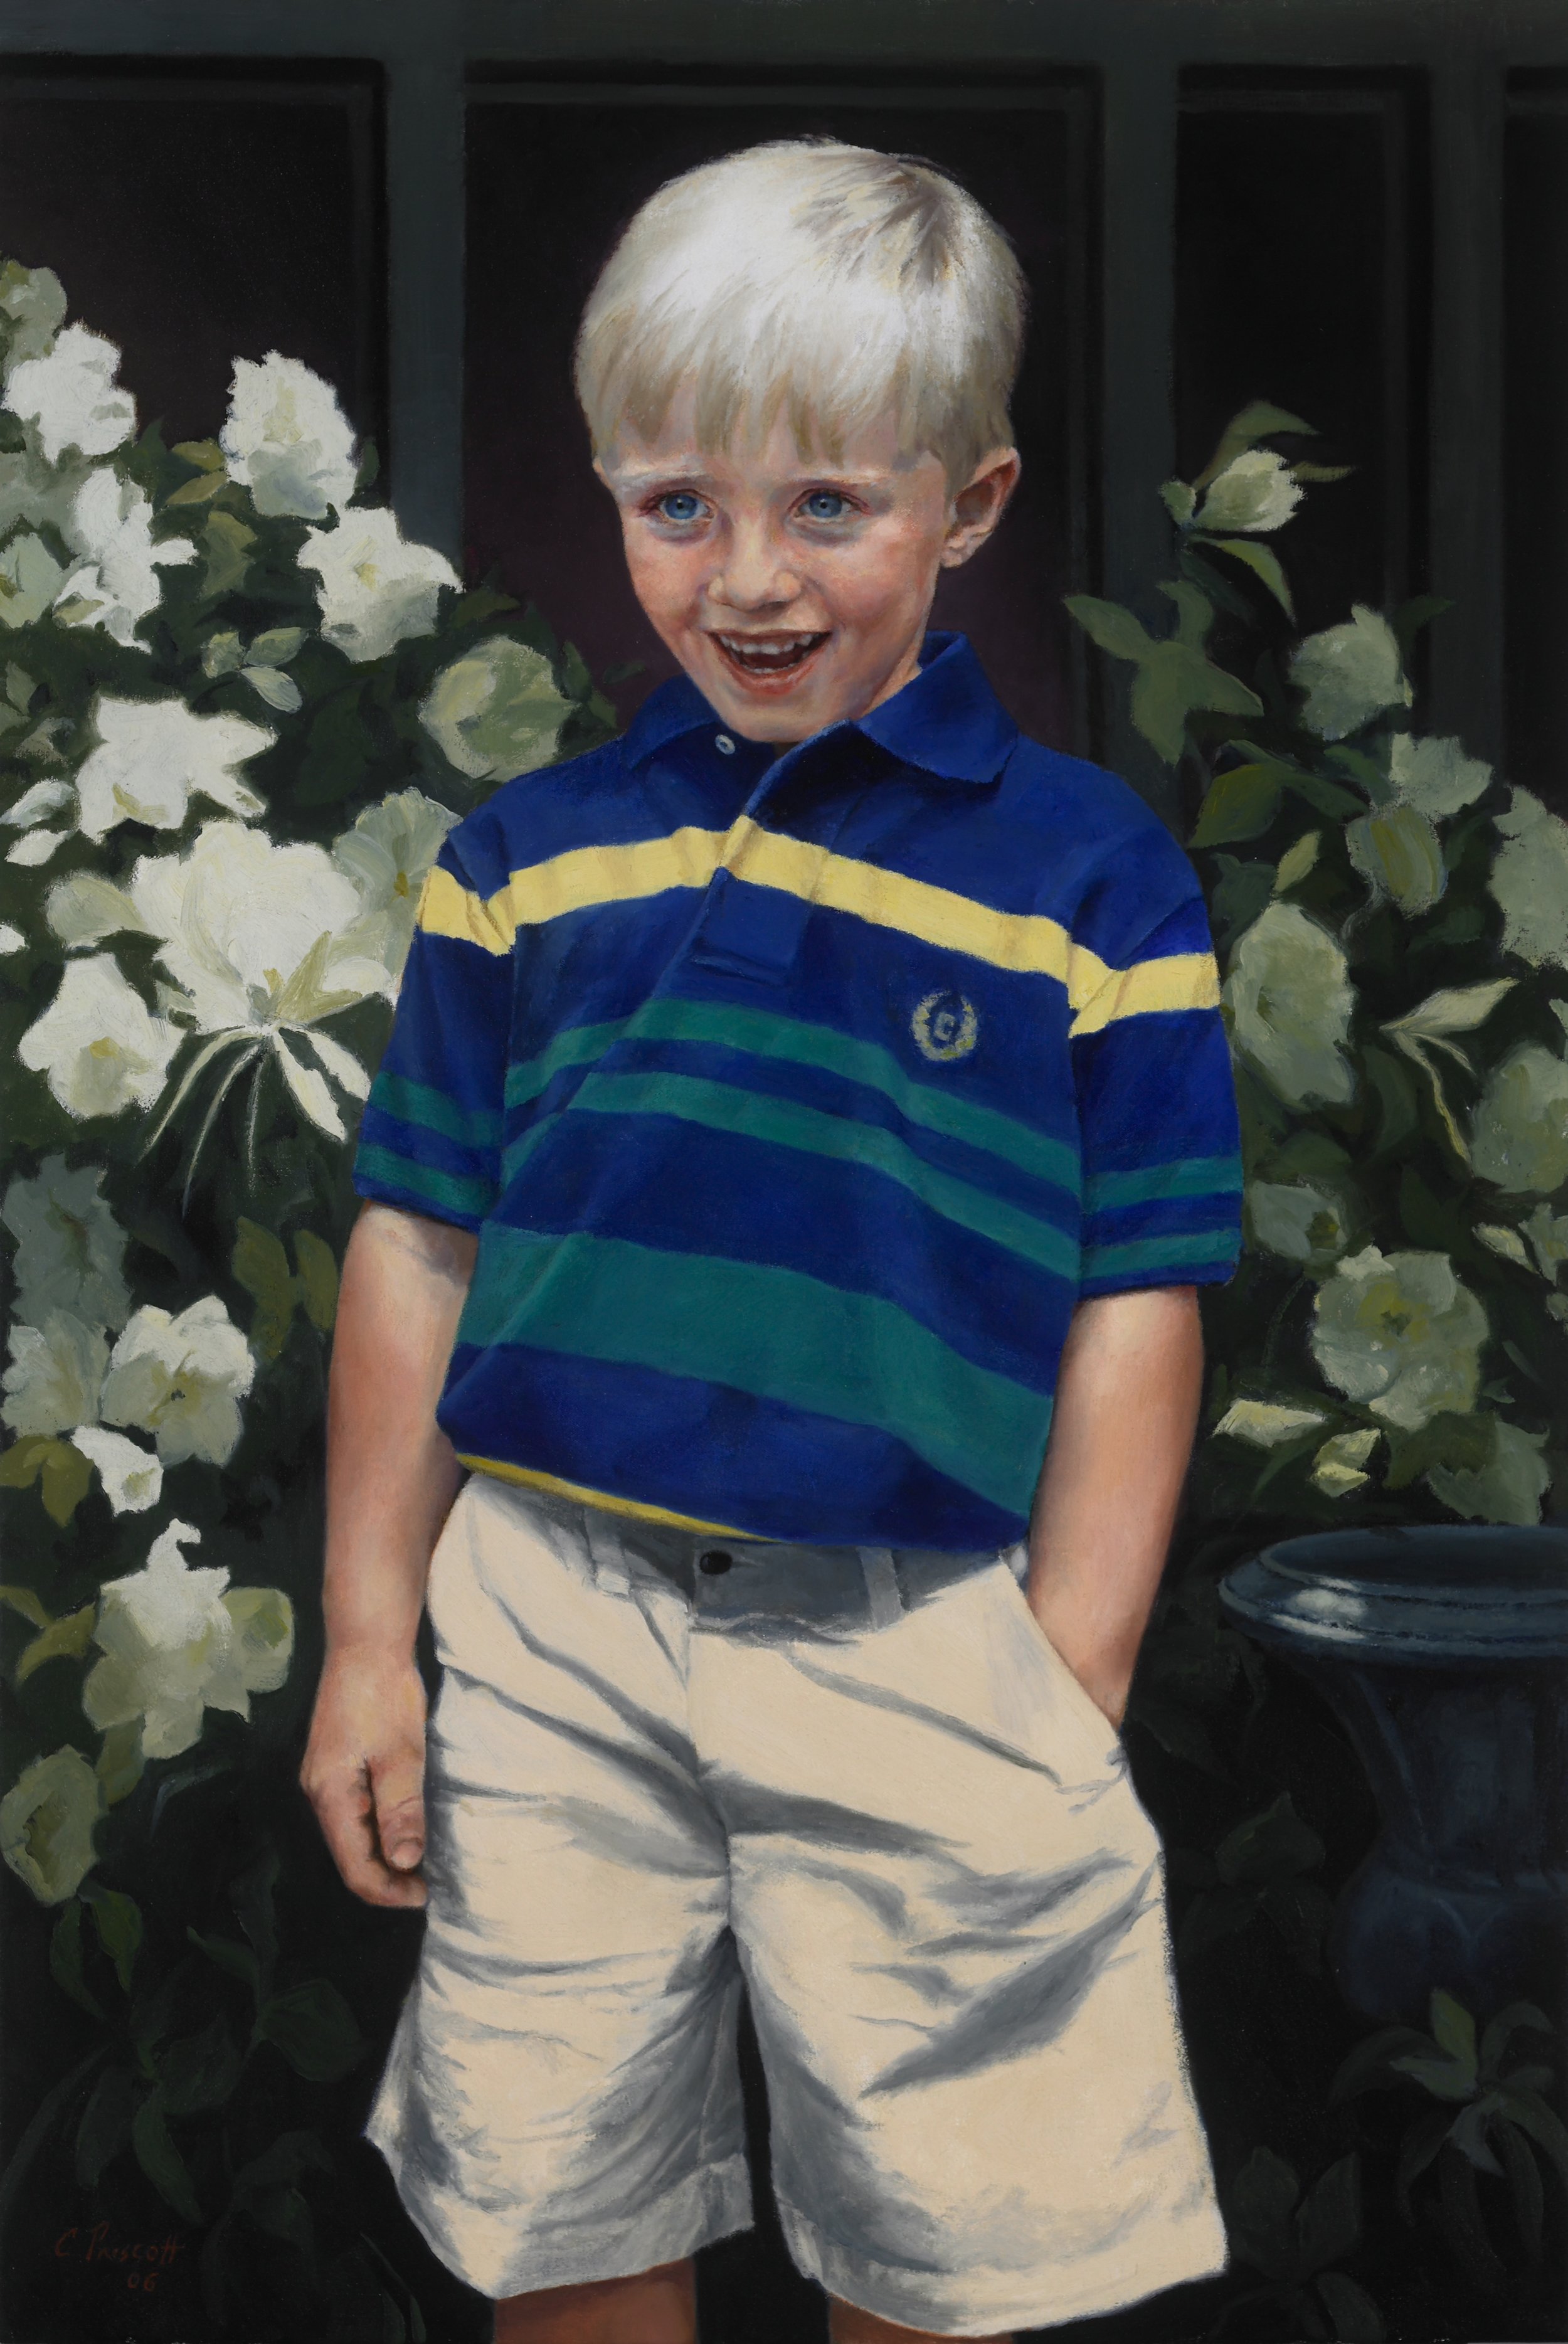   Cade , Oil on Canvas, 2006, 36" x 24"  Private Collection 